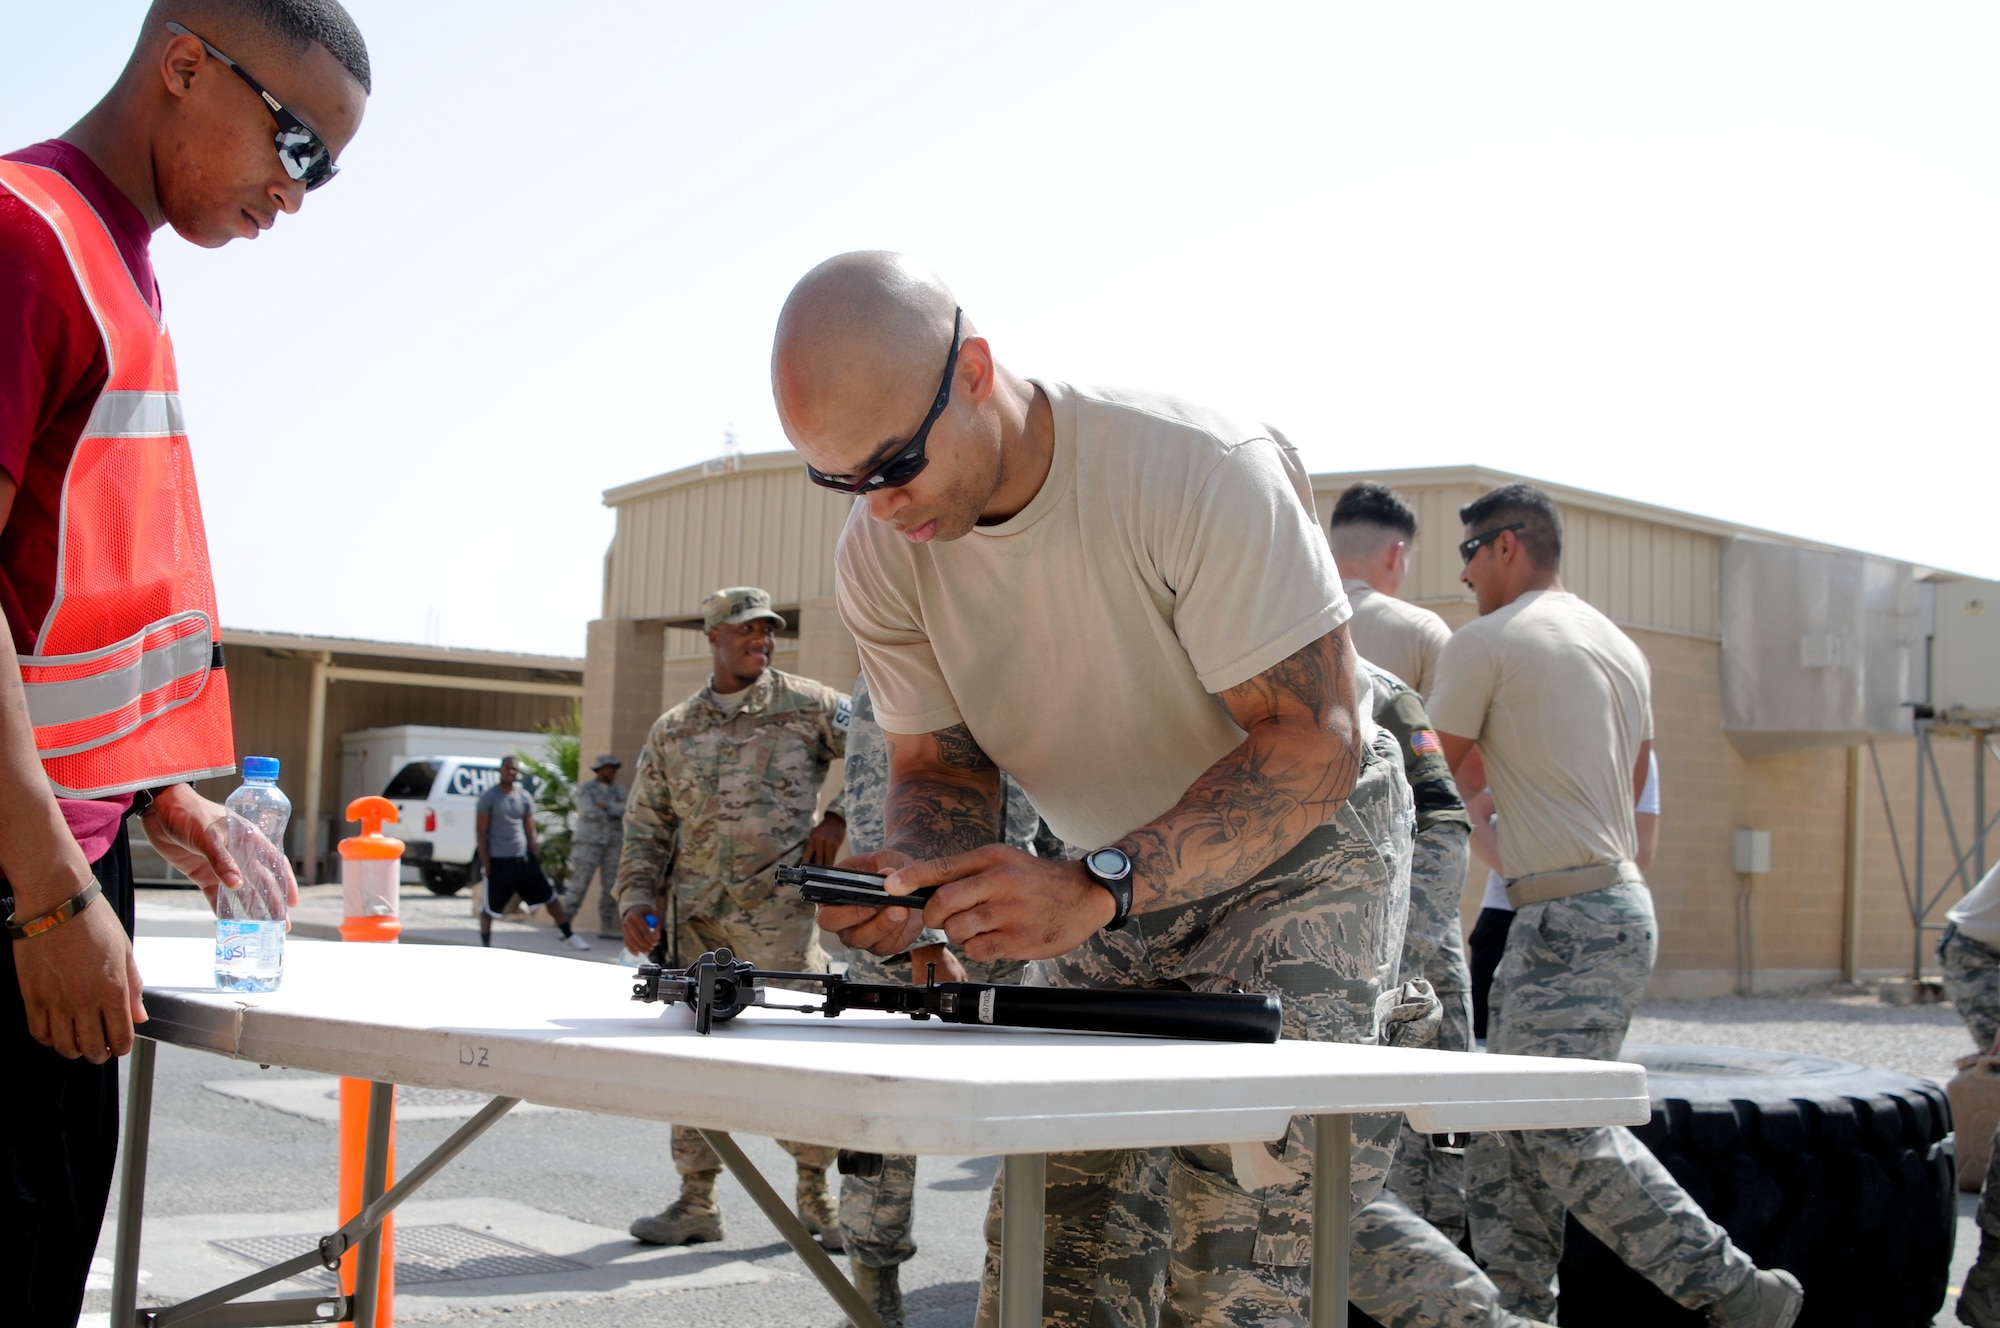 Tech. Sgt. Chris Ducre, 386th Expeditionary Security Forces Squadron, races to assemble an M-4 Carbine weapon during a relay event as a part of the Battle of the Badges held June 21, 2014. Military members who wear a badge for military police, fire department or explosive ordinance disposal competed against other military members in multiple events including a ruck march, MRAP pull and relay race to earn the title of best badge wearer. (U.S. Air Force photo by 1st Lt. Holli Nelson)